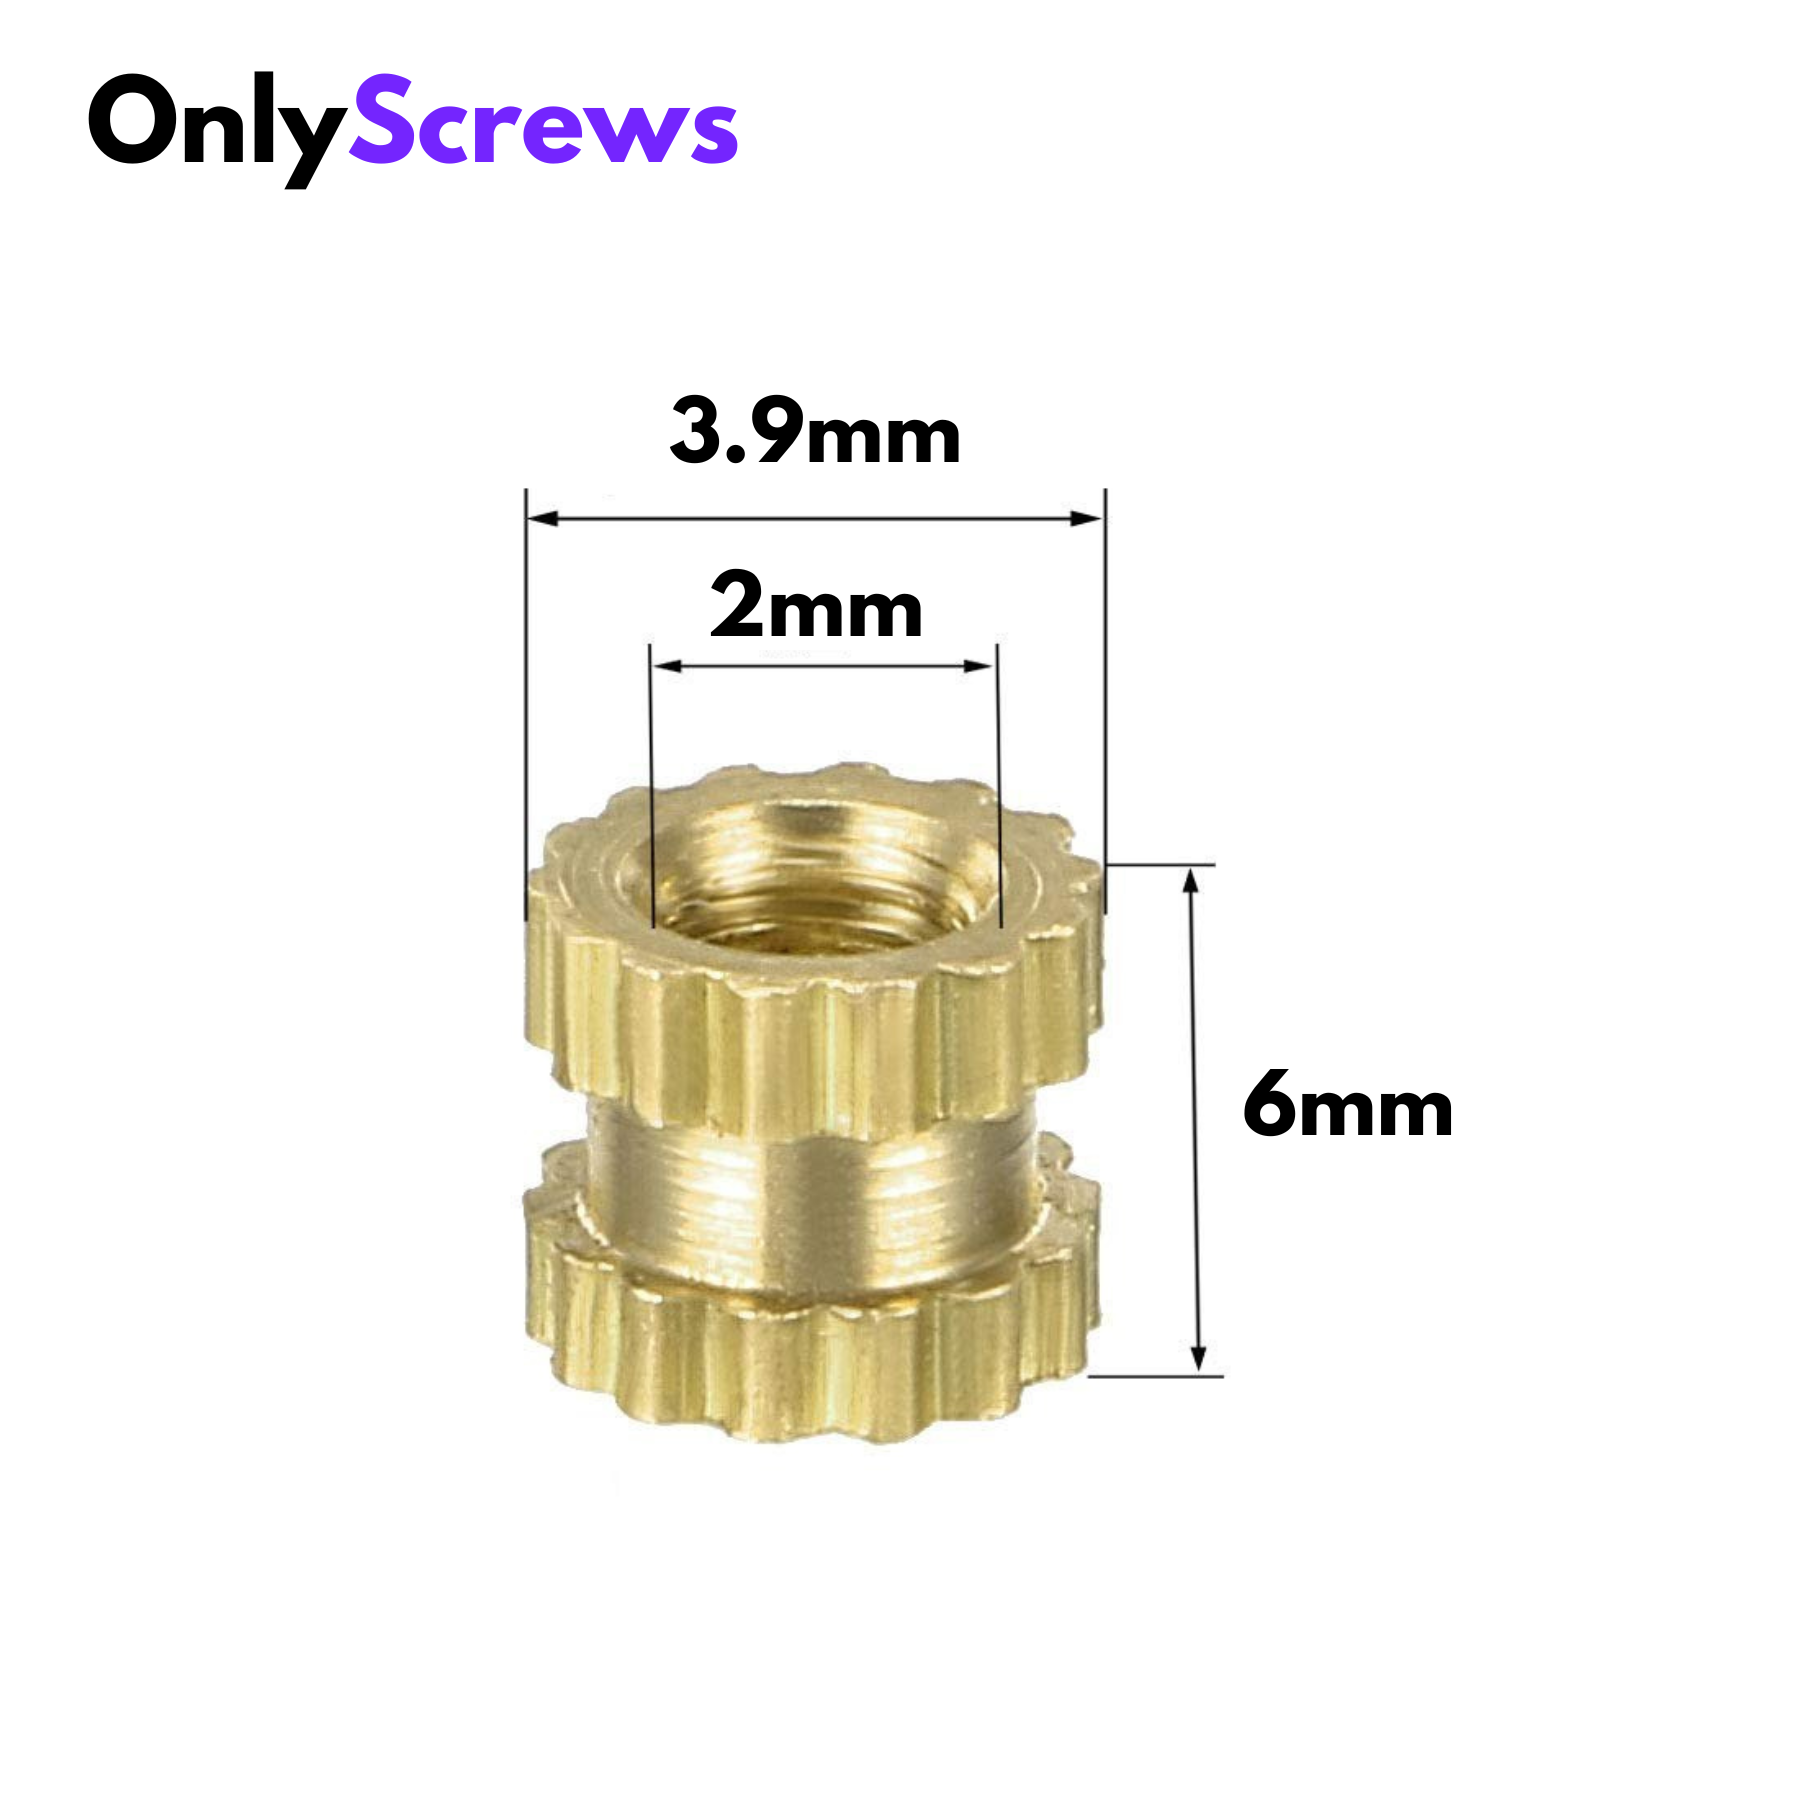 M2 X 6mm Brass Inserts with dimensions